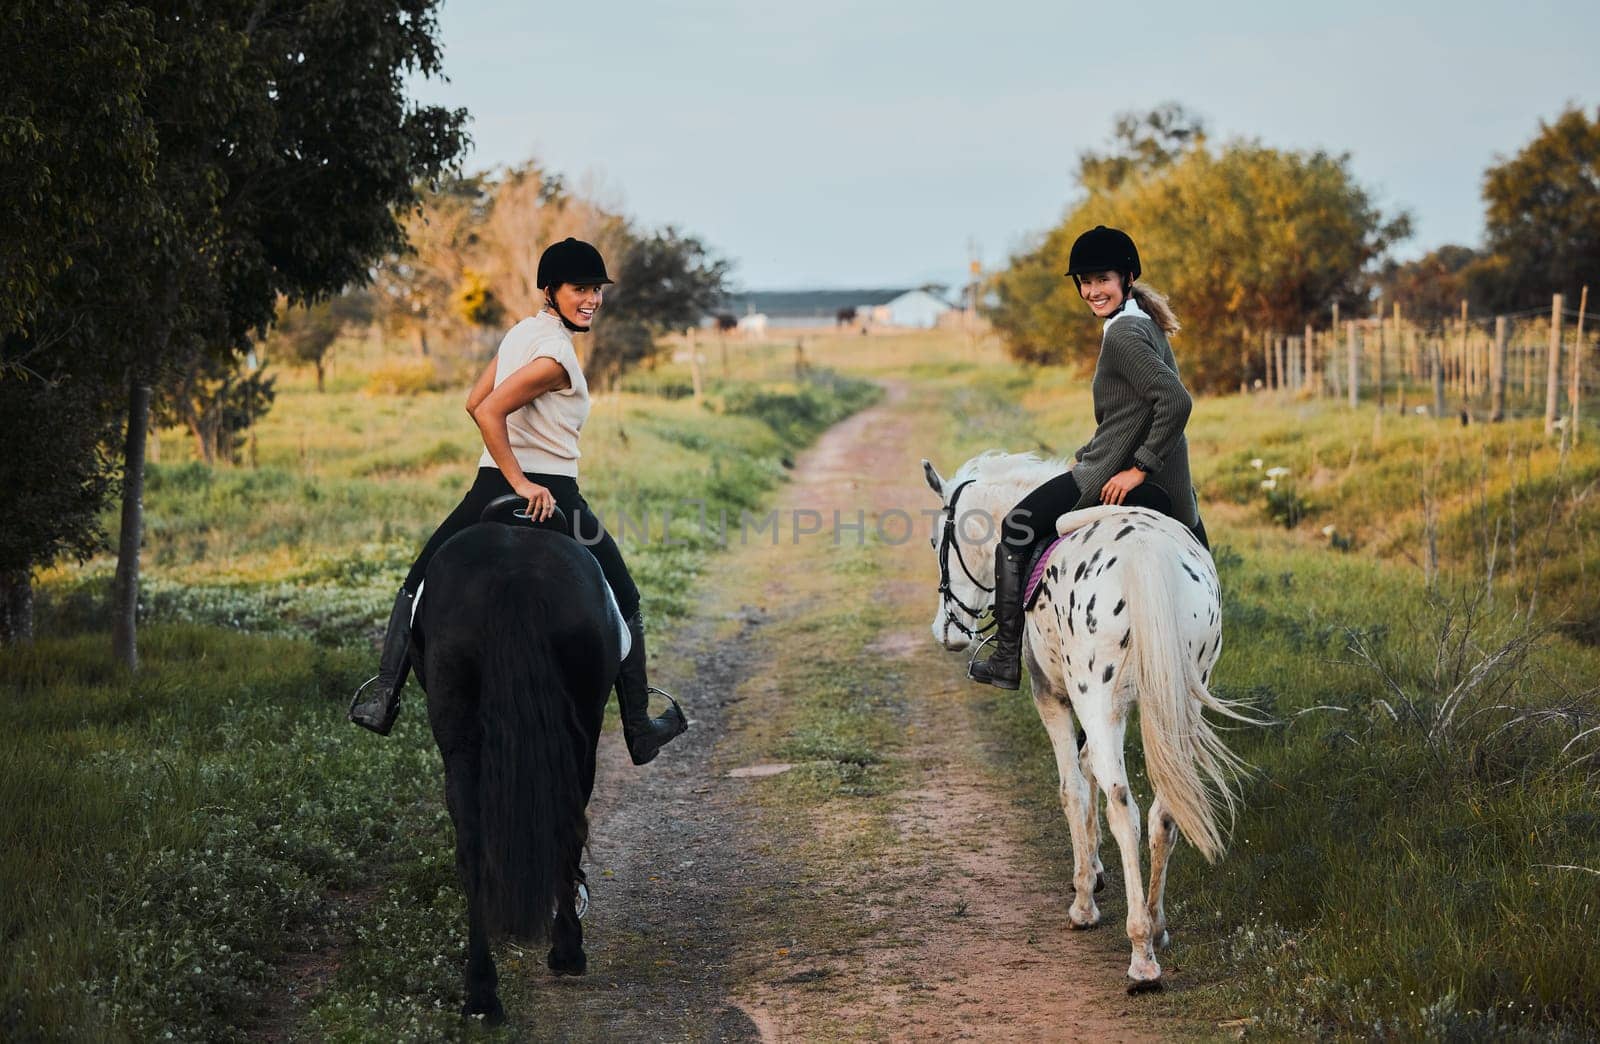 Horse riding, friends and portrait of women in countryside outdoor for freedom. Equestrian, happy girls and animals in field, nature and adventure to travel, journey and vacation in summer together